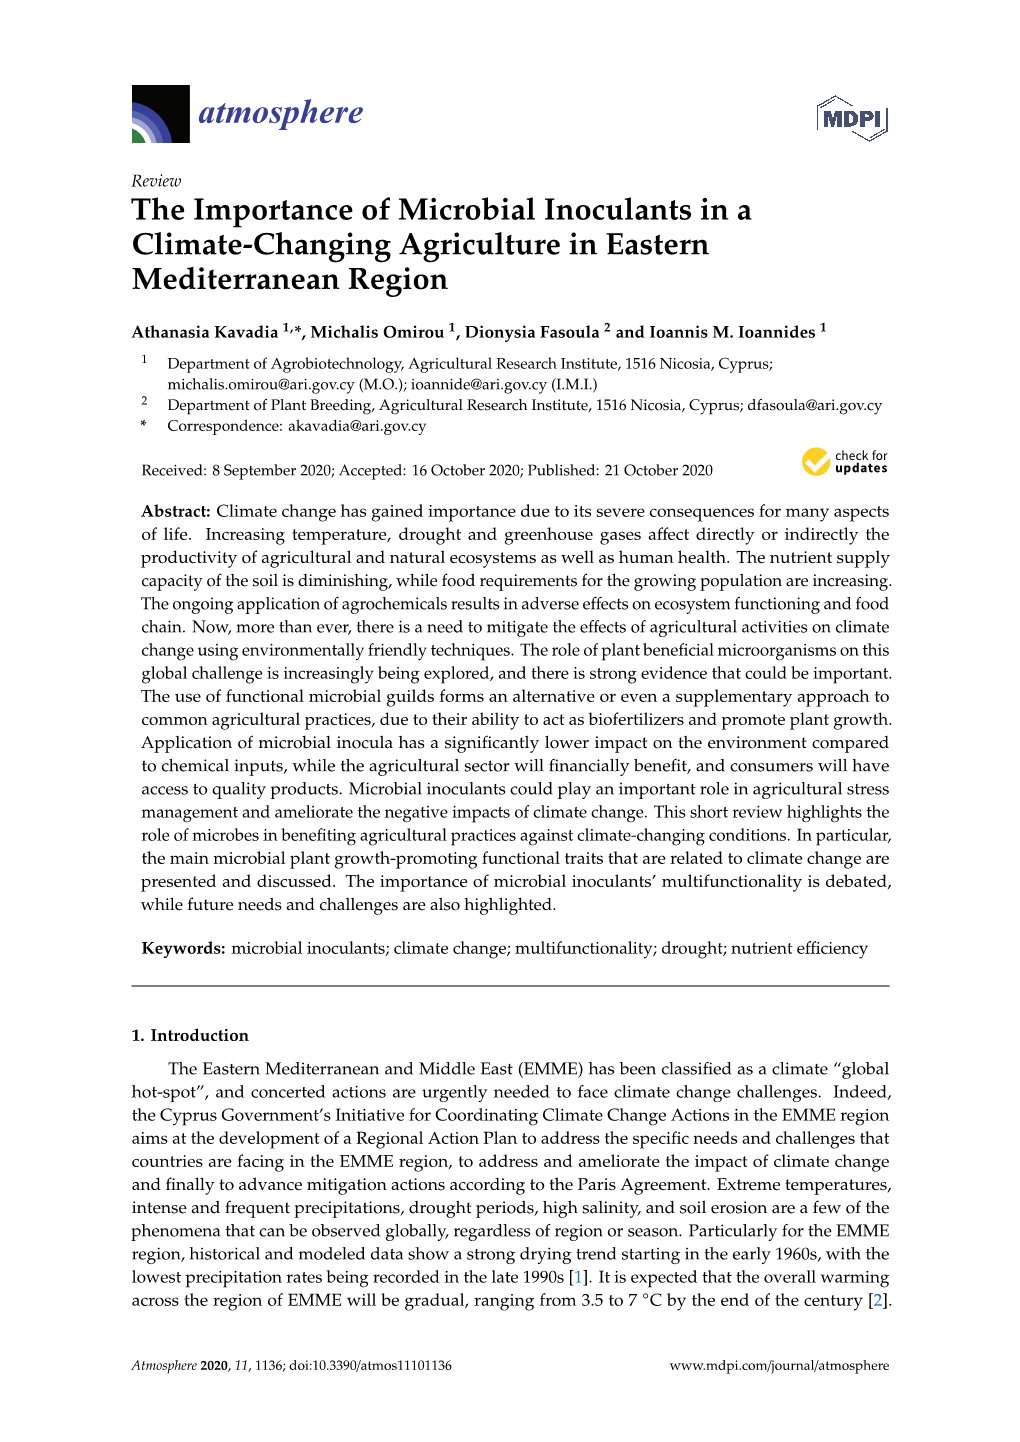 The Importance of Microbial Inoculants in a Climate-Changing Agriculture in Eastern Mediterranean Region